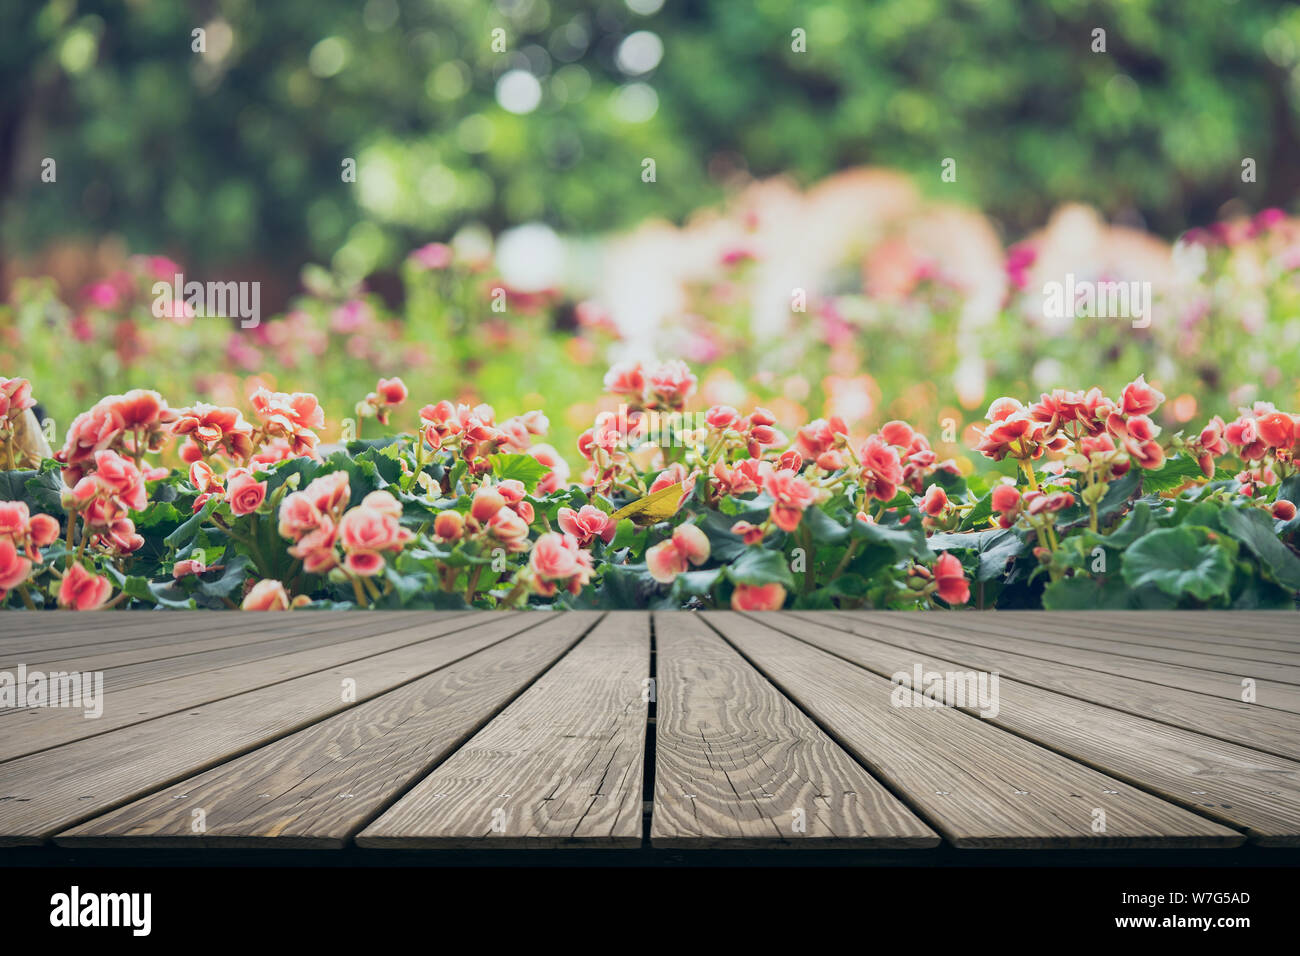 Mock up perspective empty top wooden board with Numerous bright flowers of tuberous begonias (Begonia tuberhybrida) in garden. Stock Photo